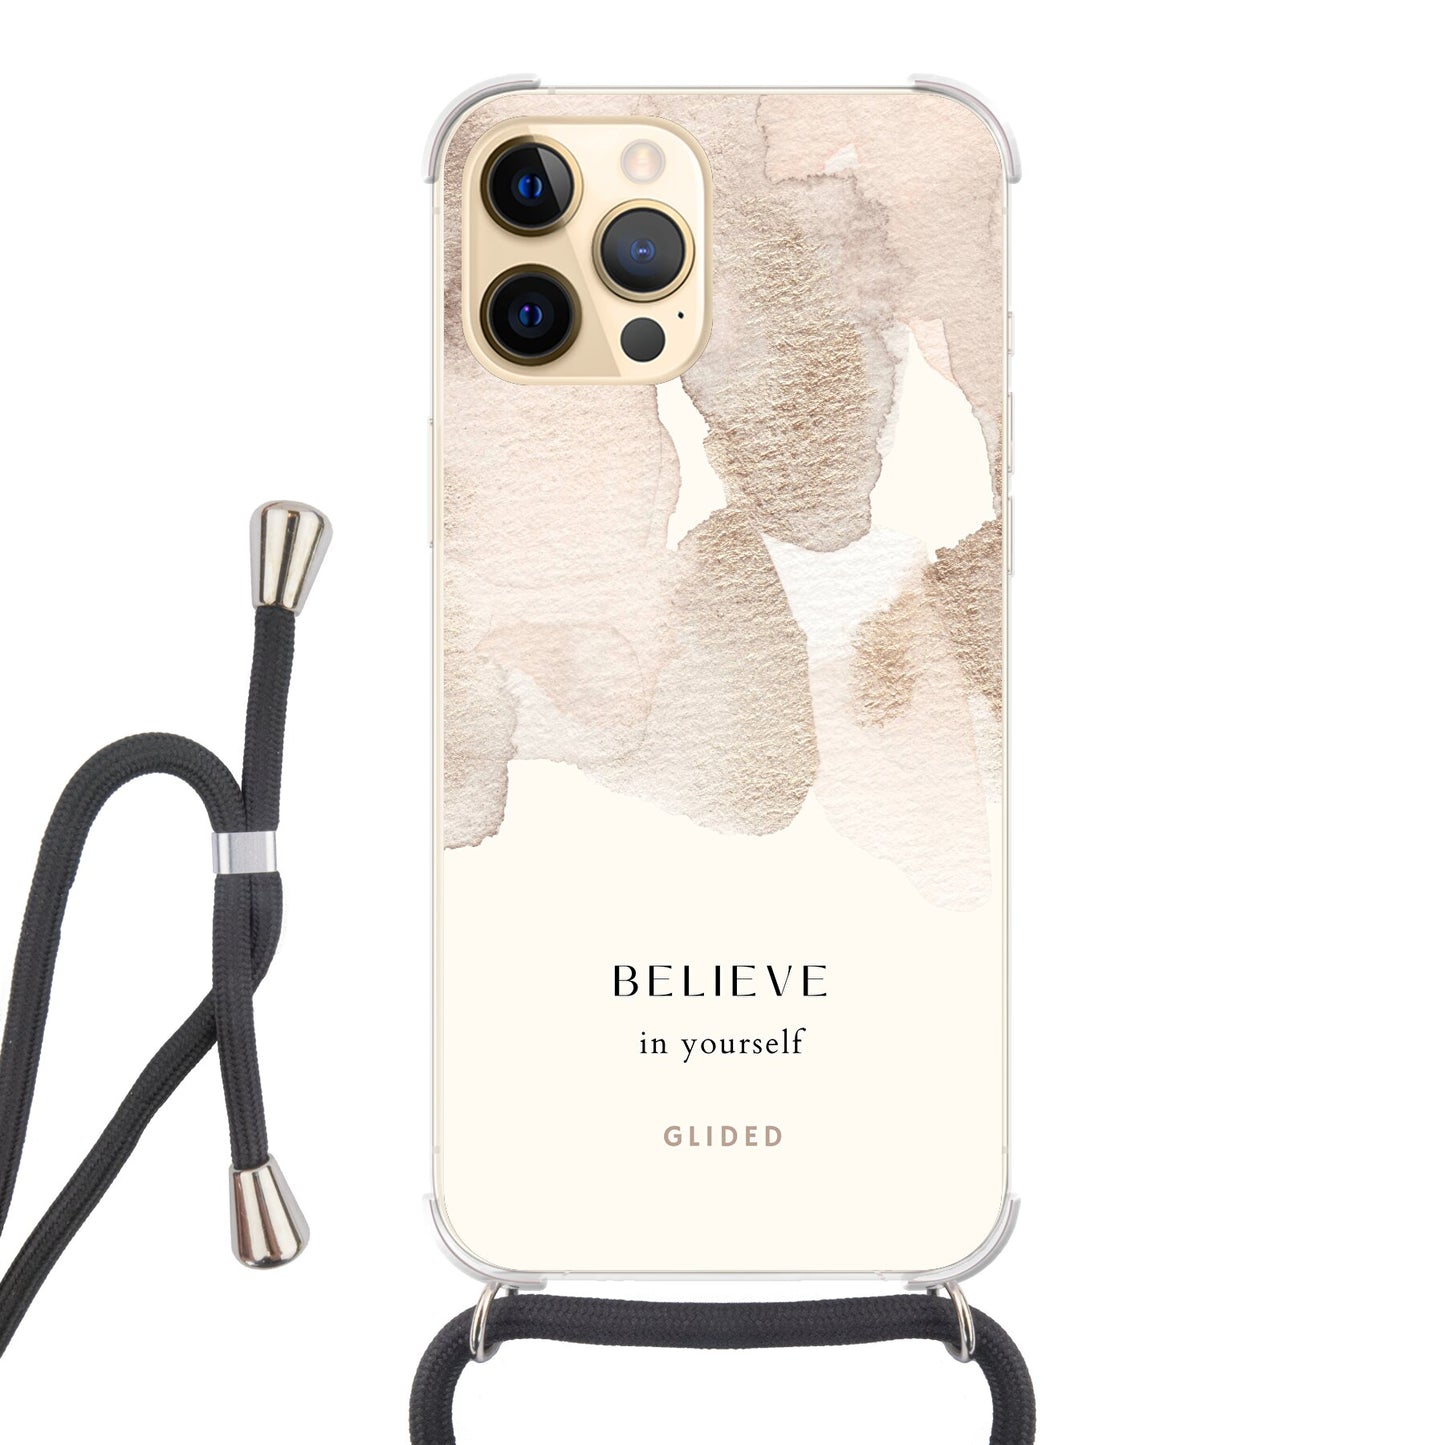 Believe in yourself - iPhone 12 Pro Max Handyhülle Crossbody case mit Band